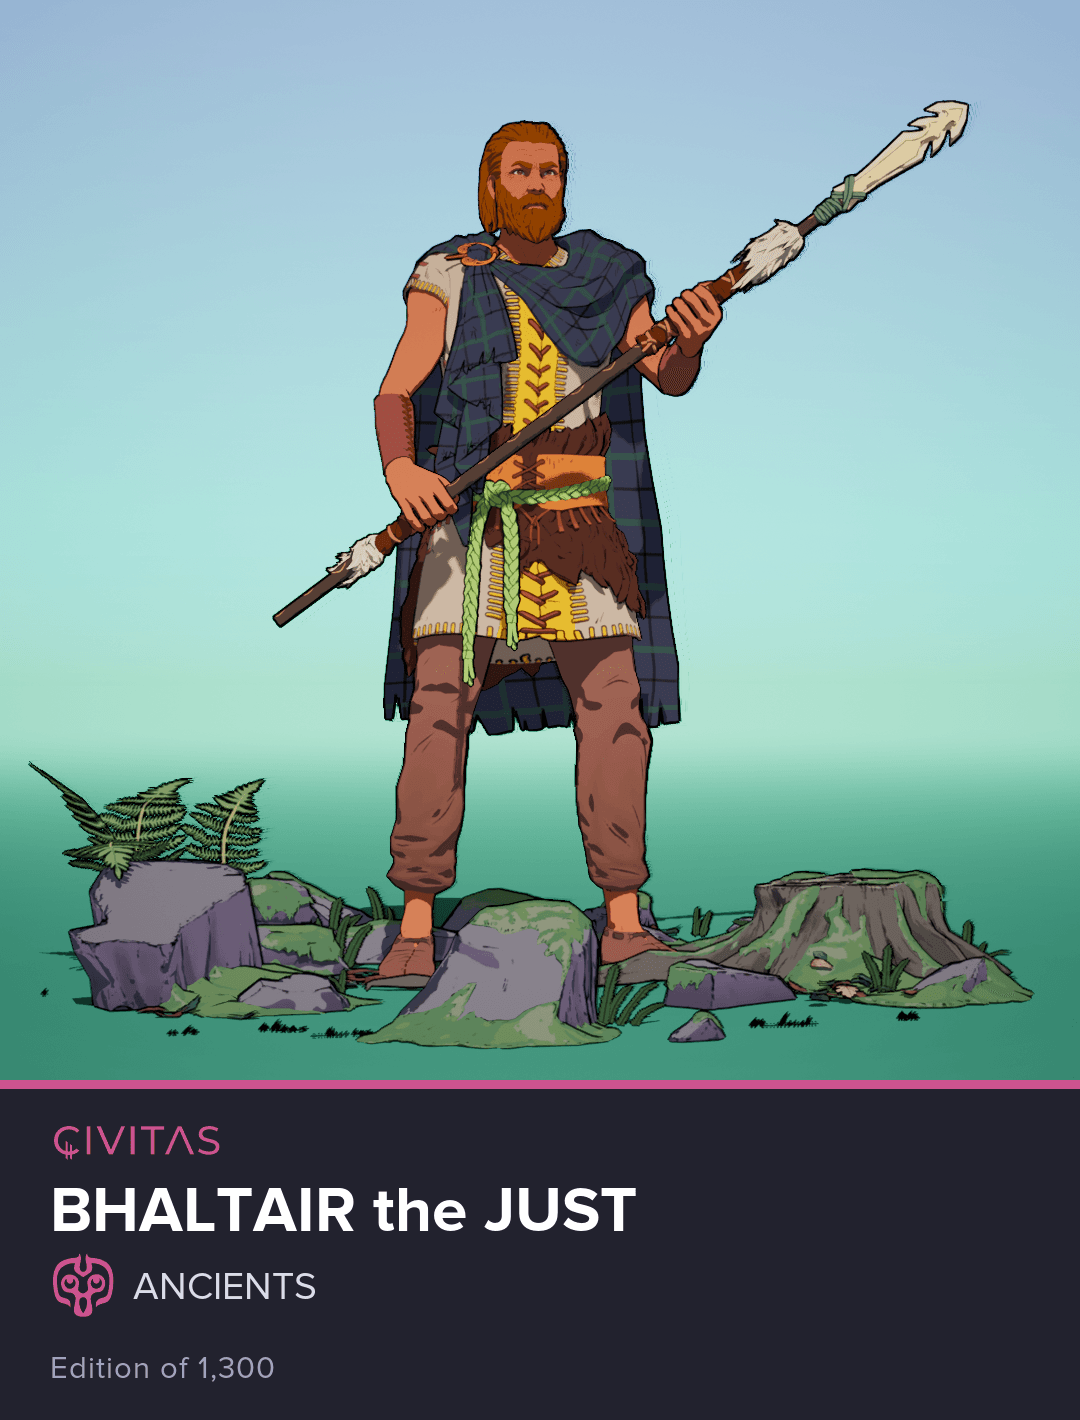 Bhaltair the Just #312